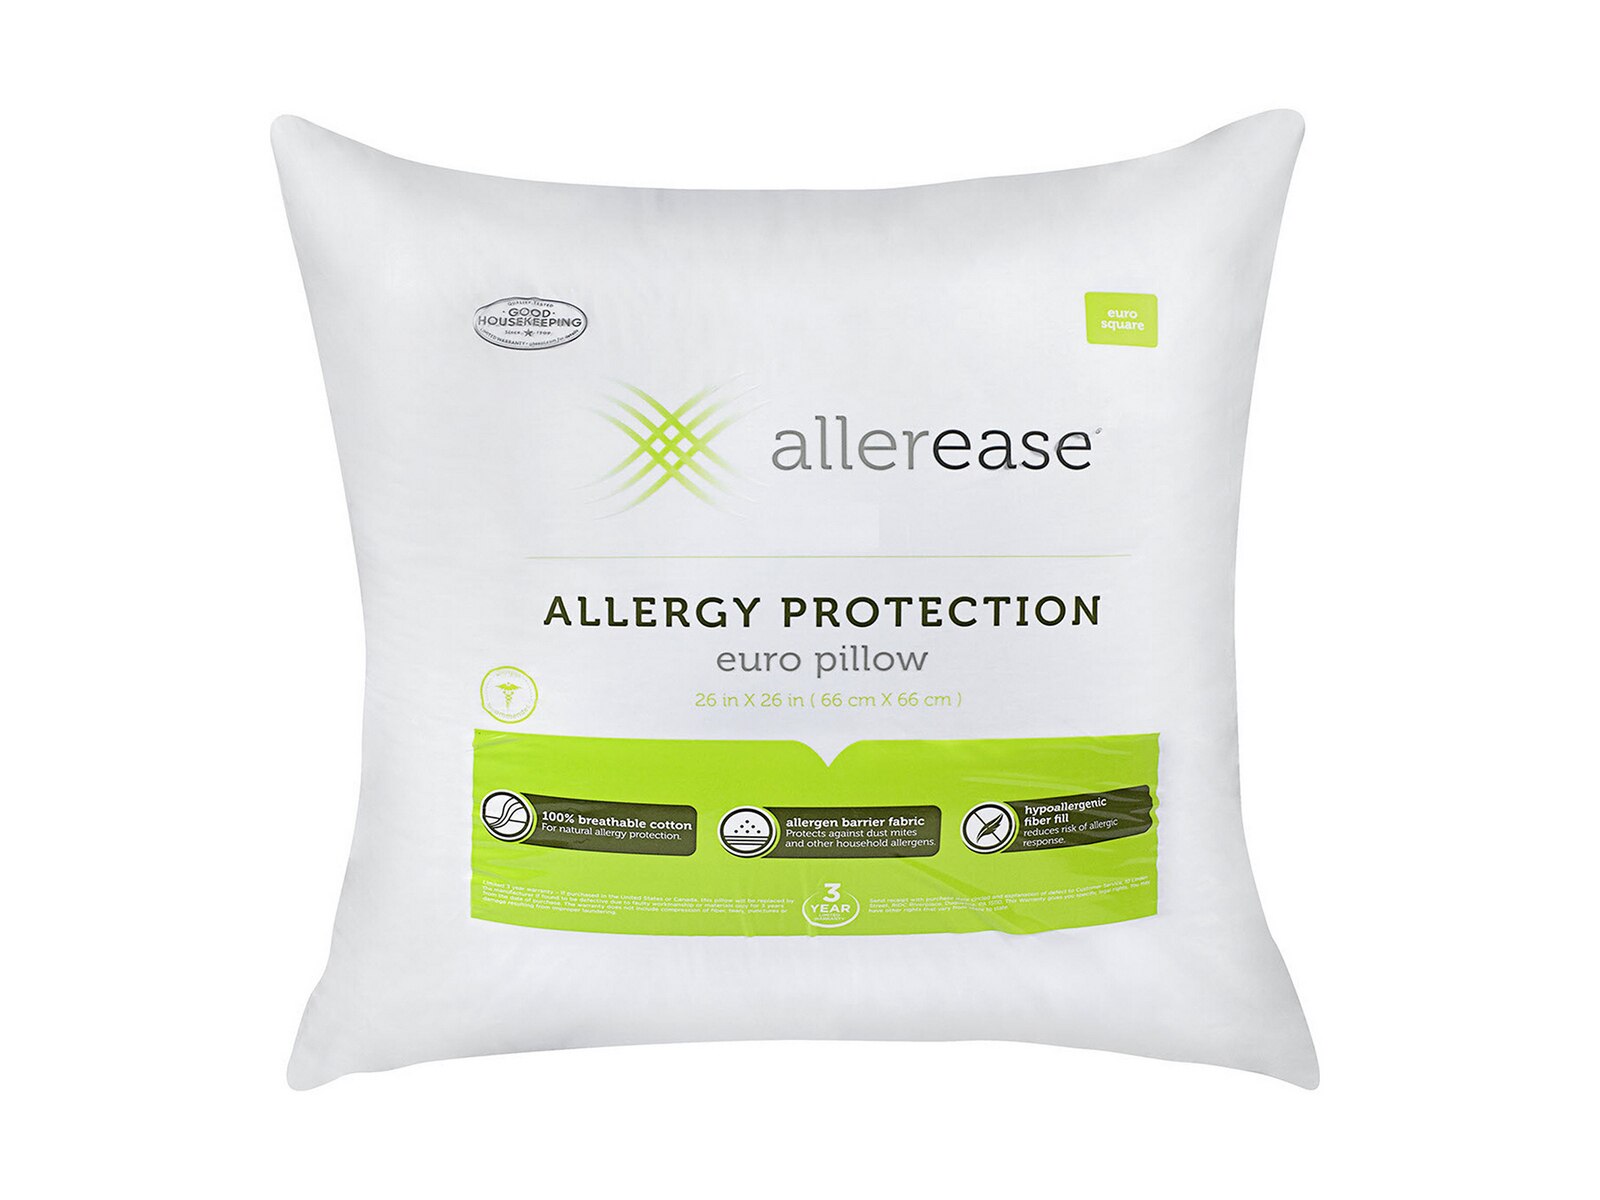 allerease mattress protector iwhich is the top side